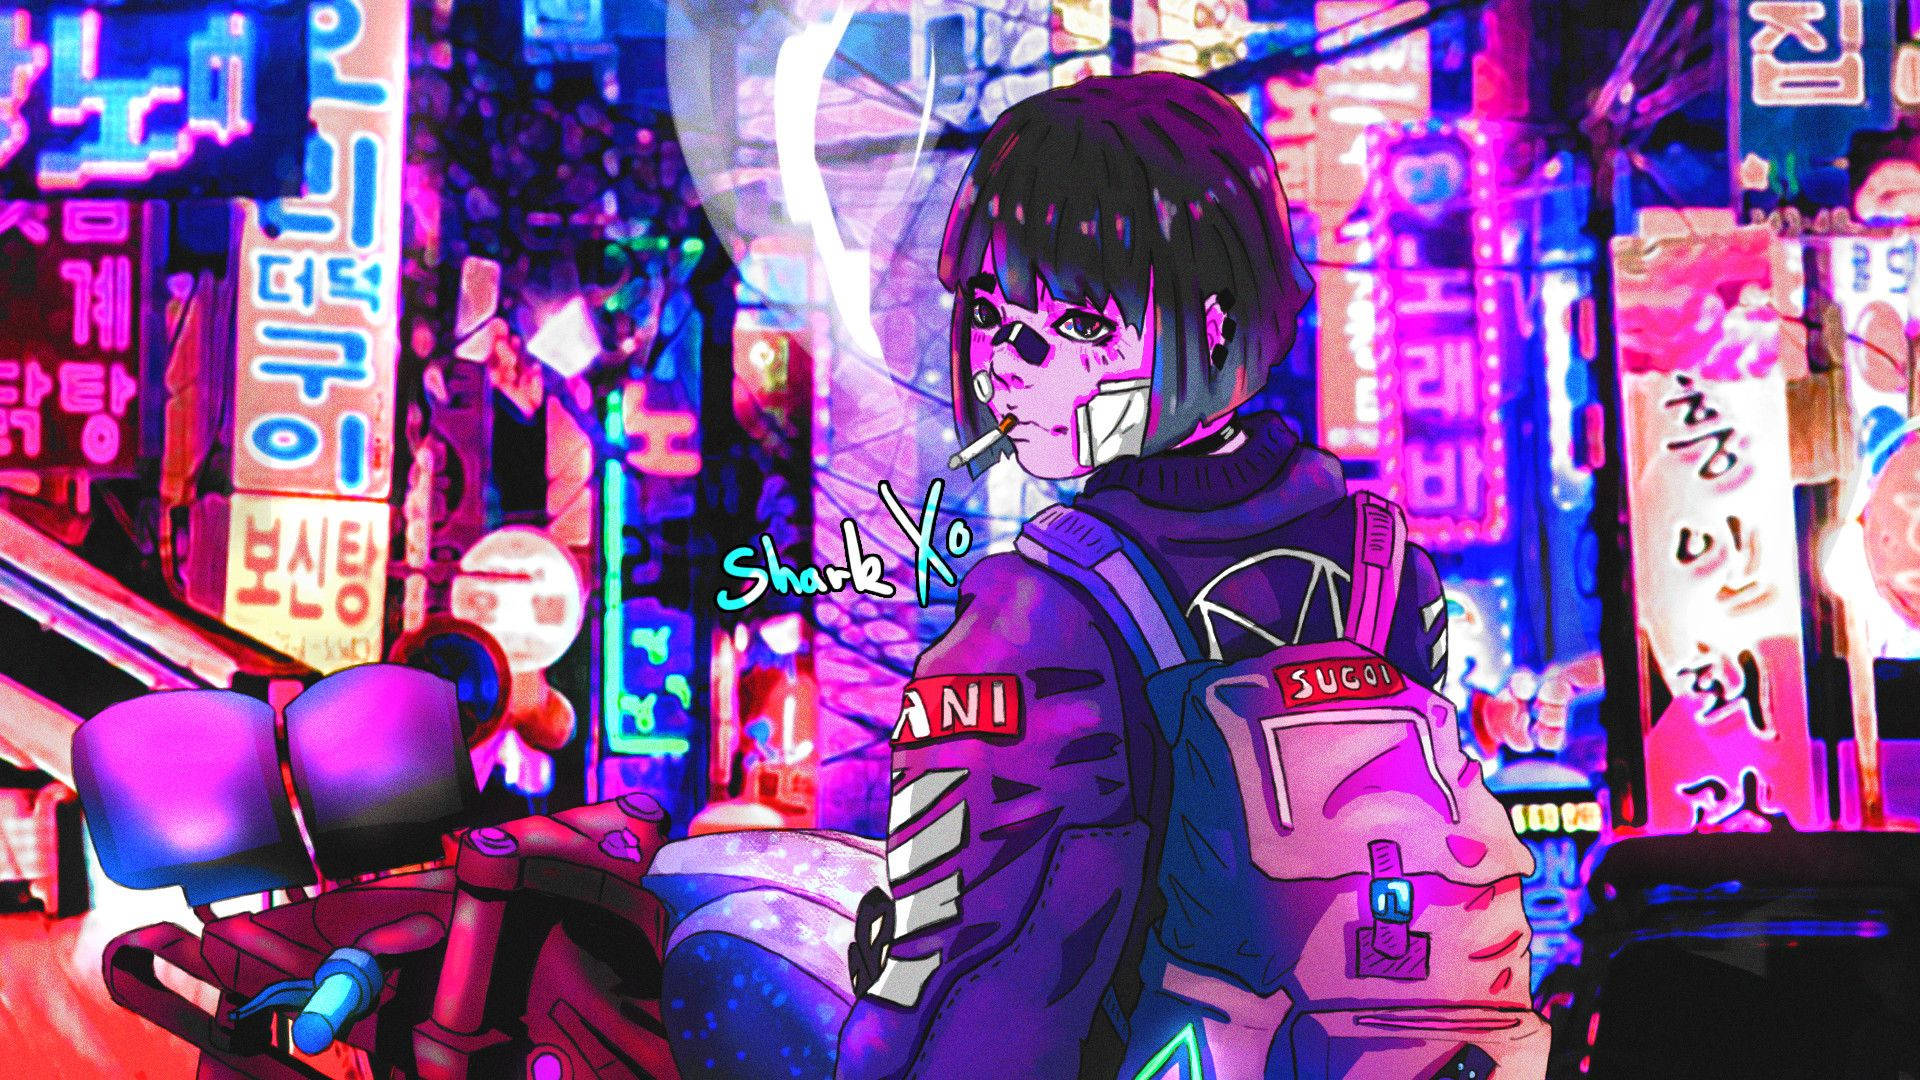 Aesthetic Pfp Girl And Neon Signages